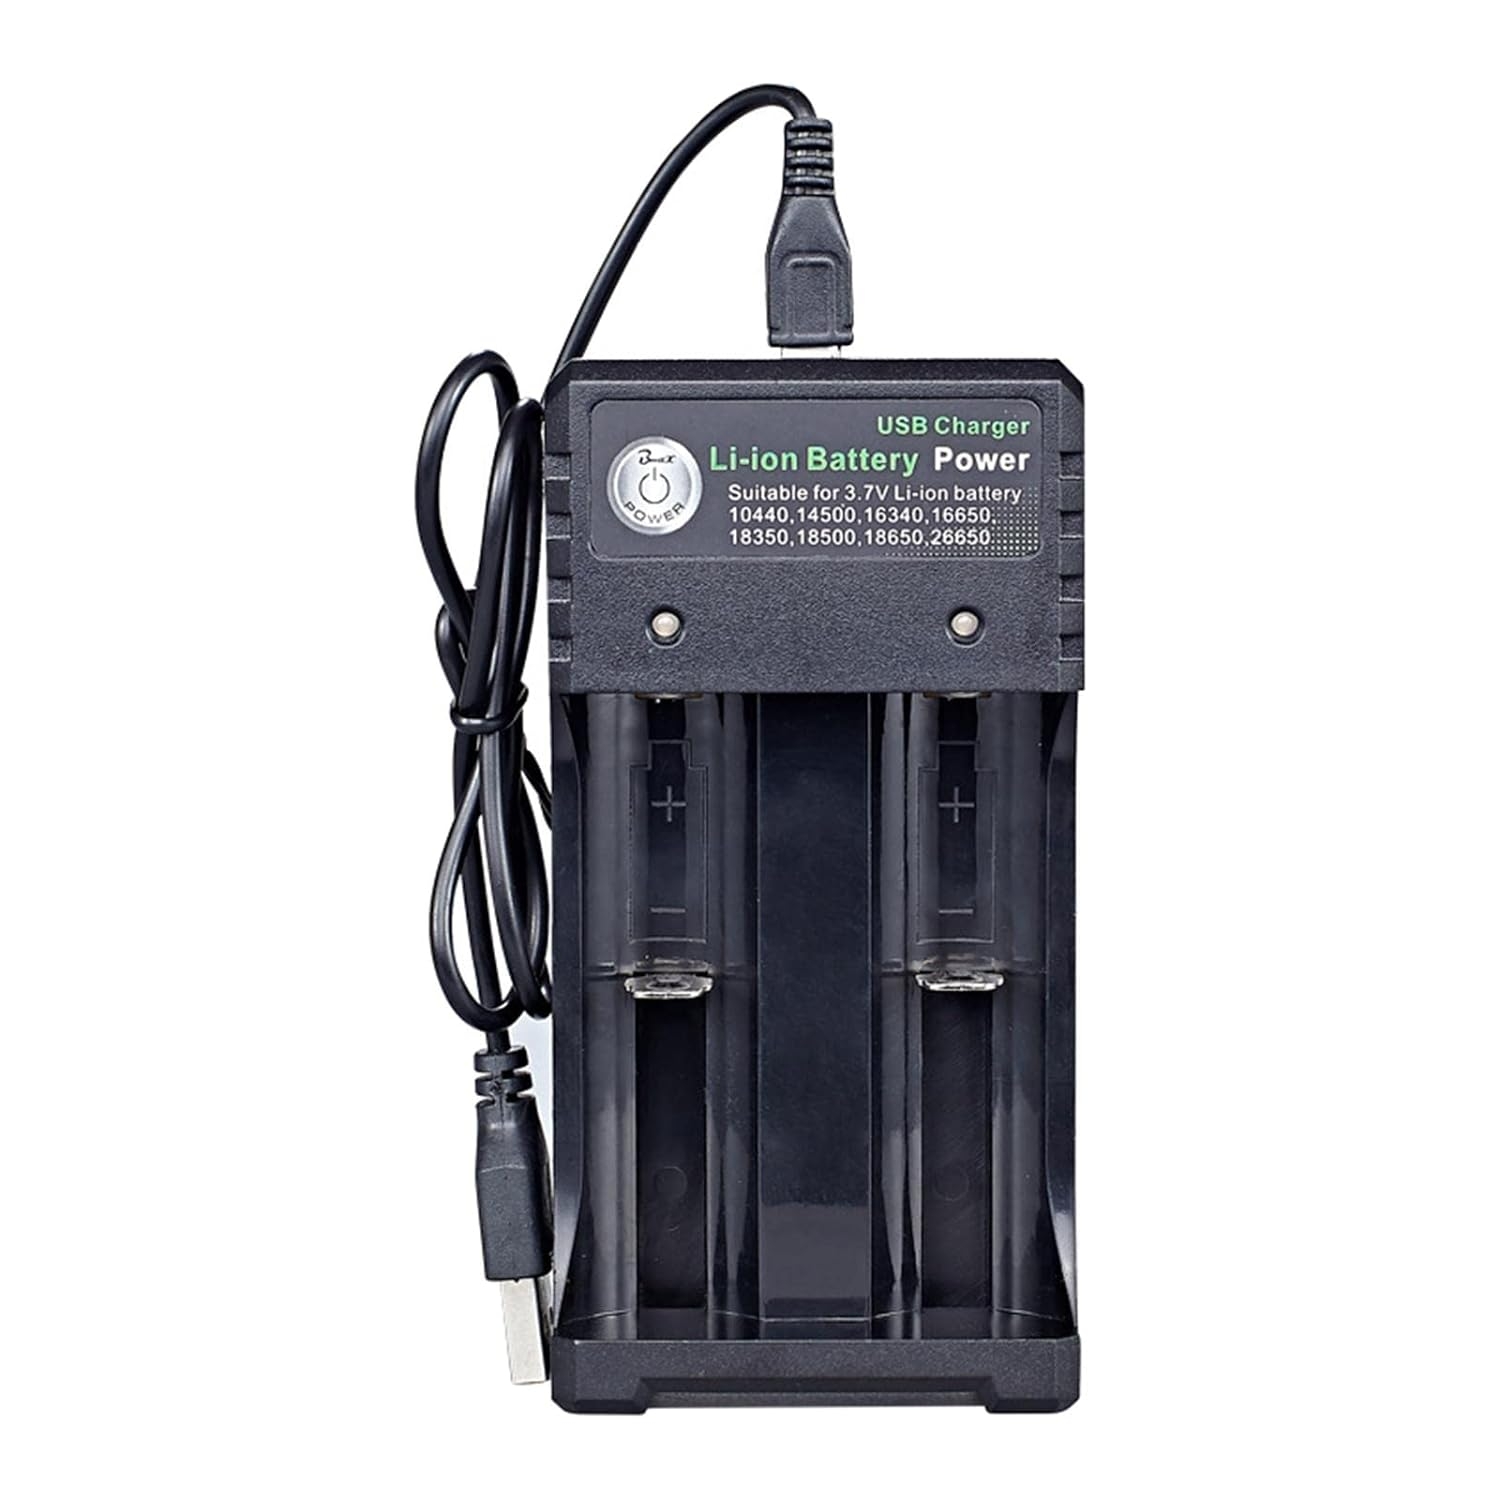 2 Slot Battery Charger for Li-ion NiMH NiCD Rechargeable Batteries | Universal Compatibility